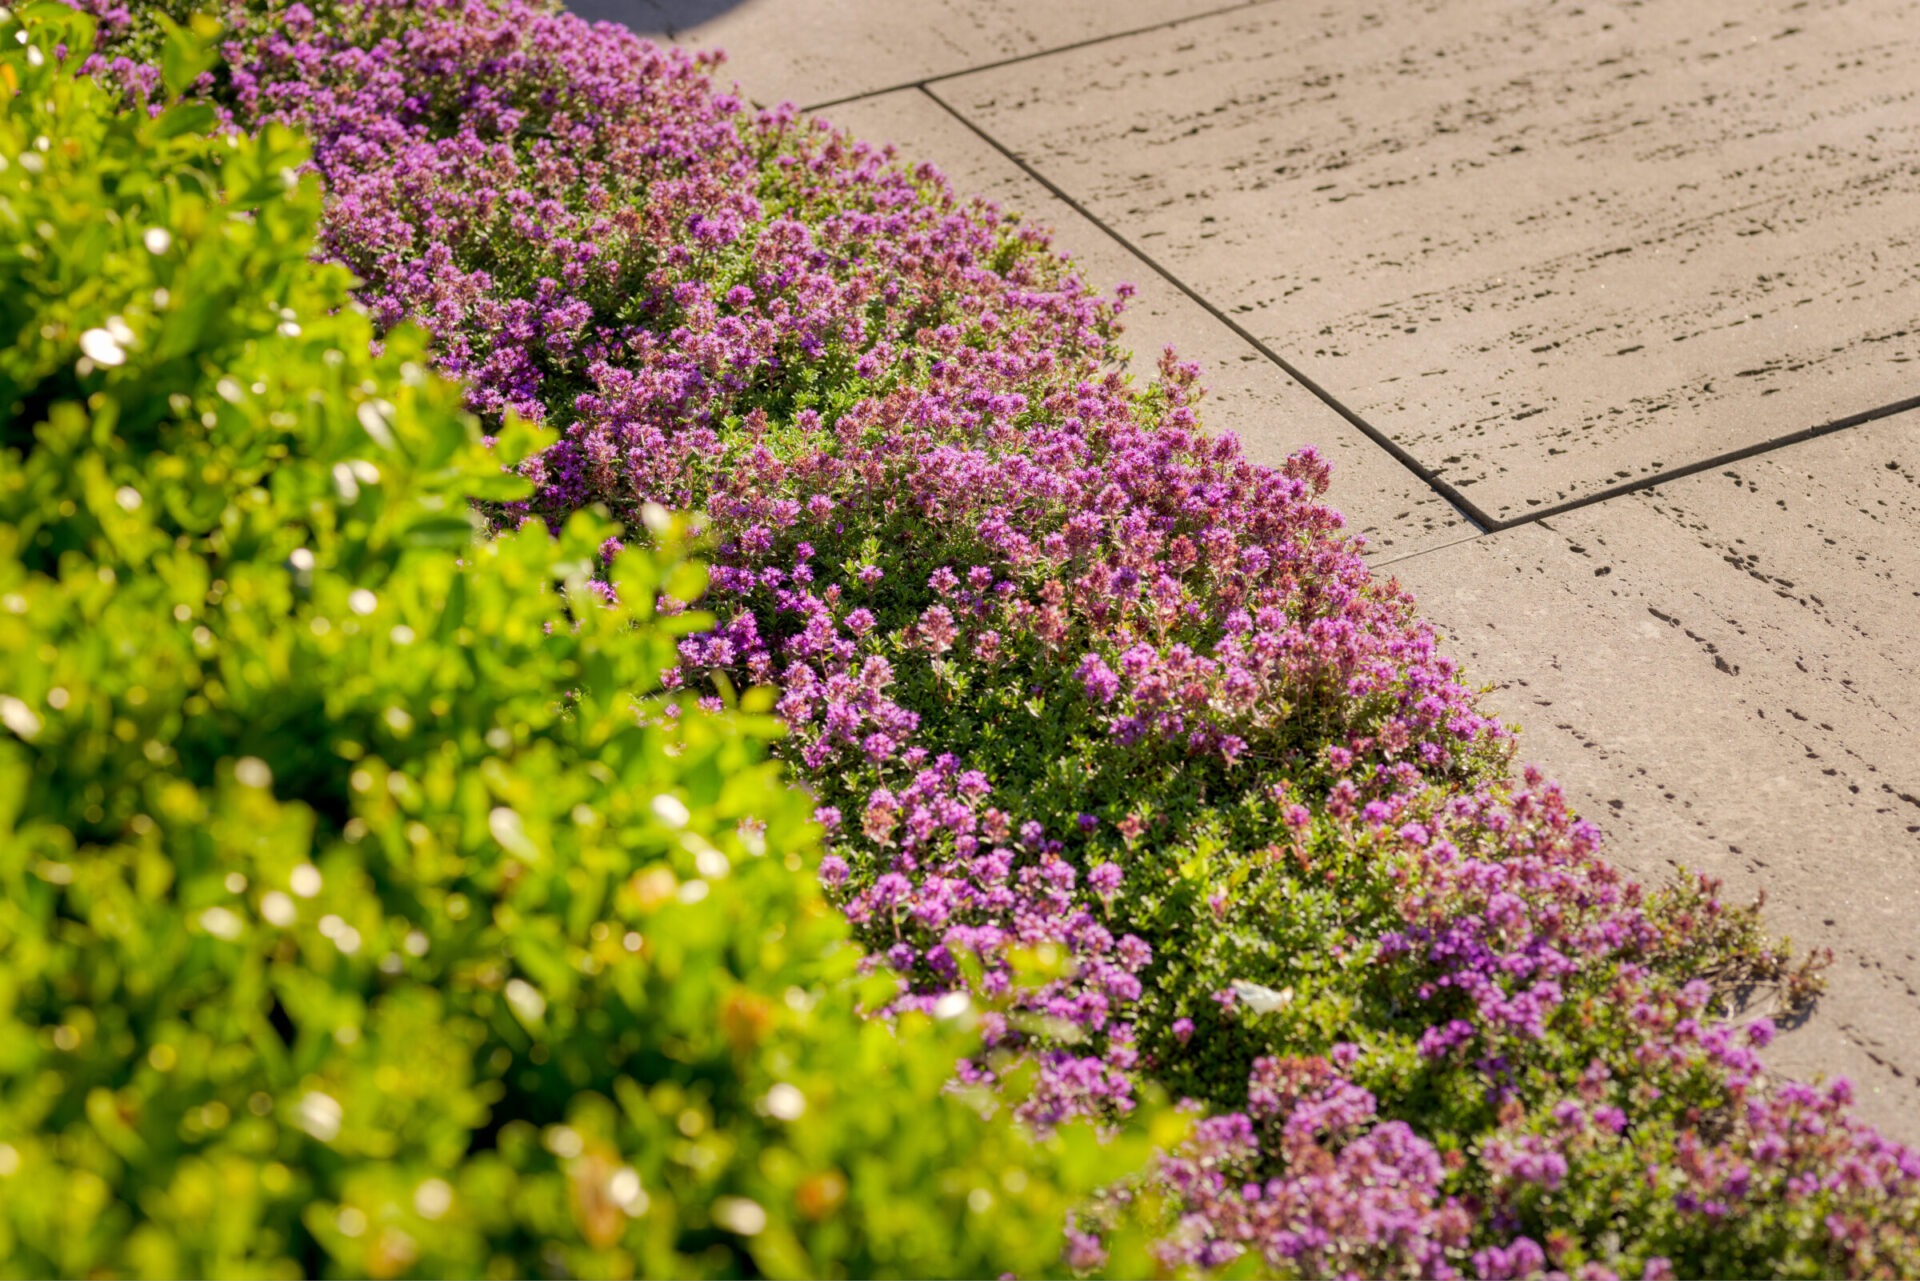 A concrete pathway intersects vibrant purple flowering shrubs with lush green foliage under bright sunlight, creating a pleasing garden walkway.